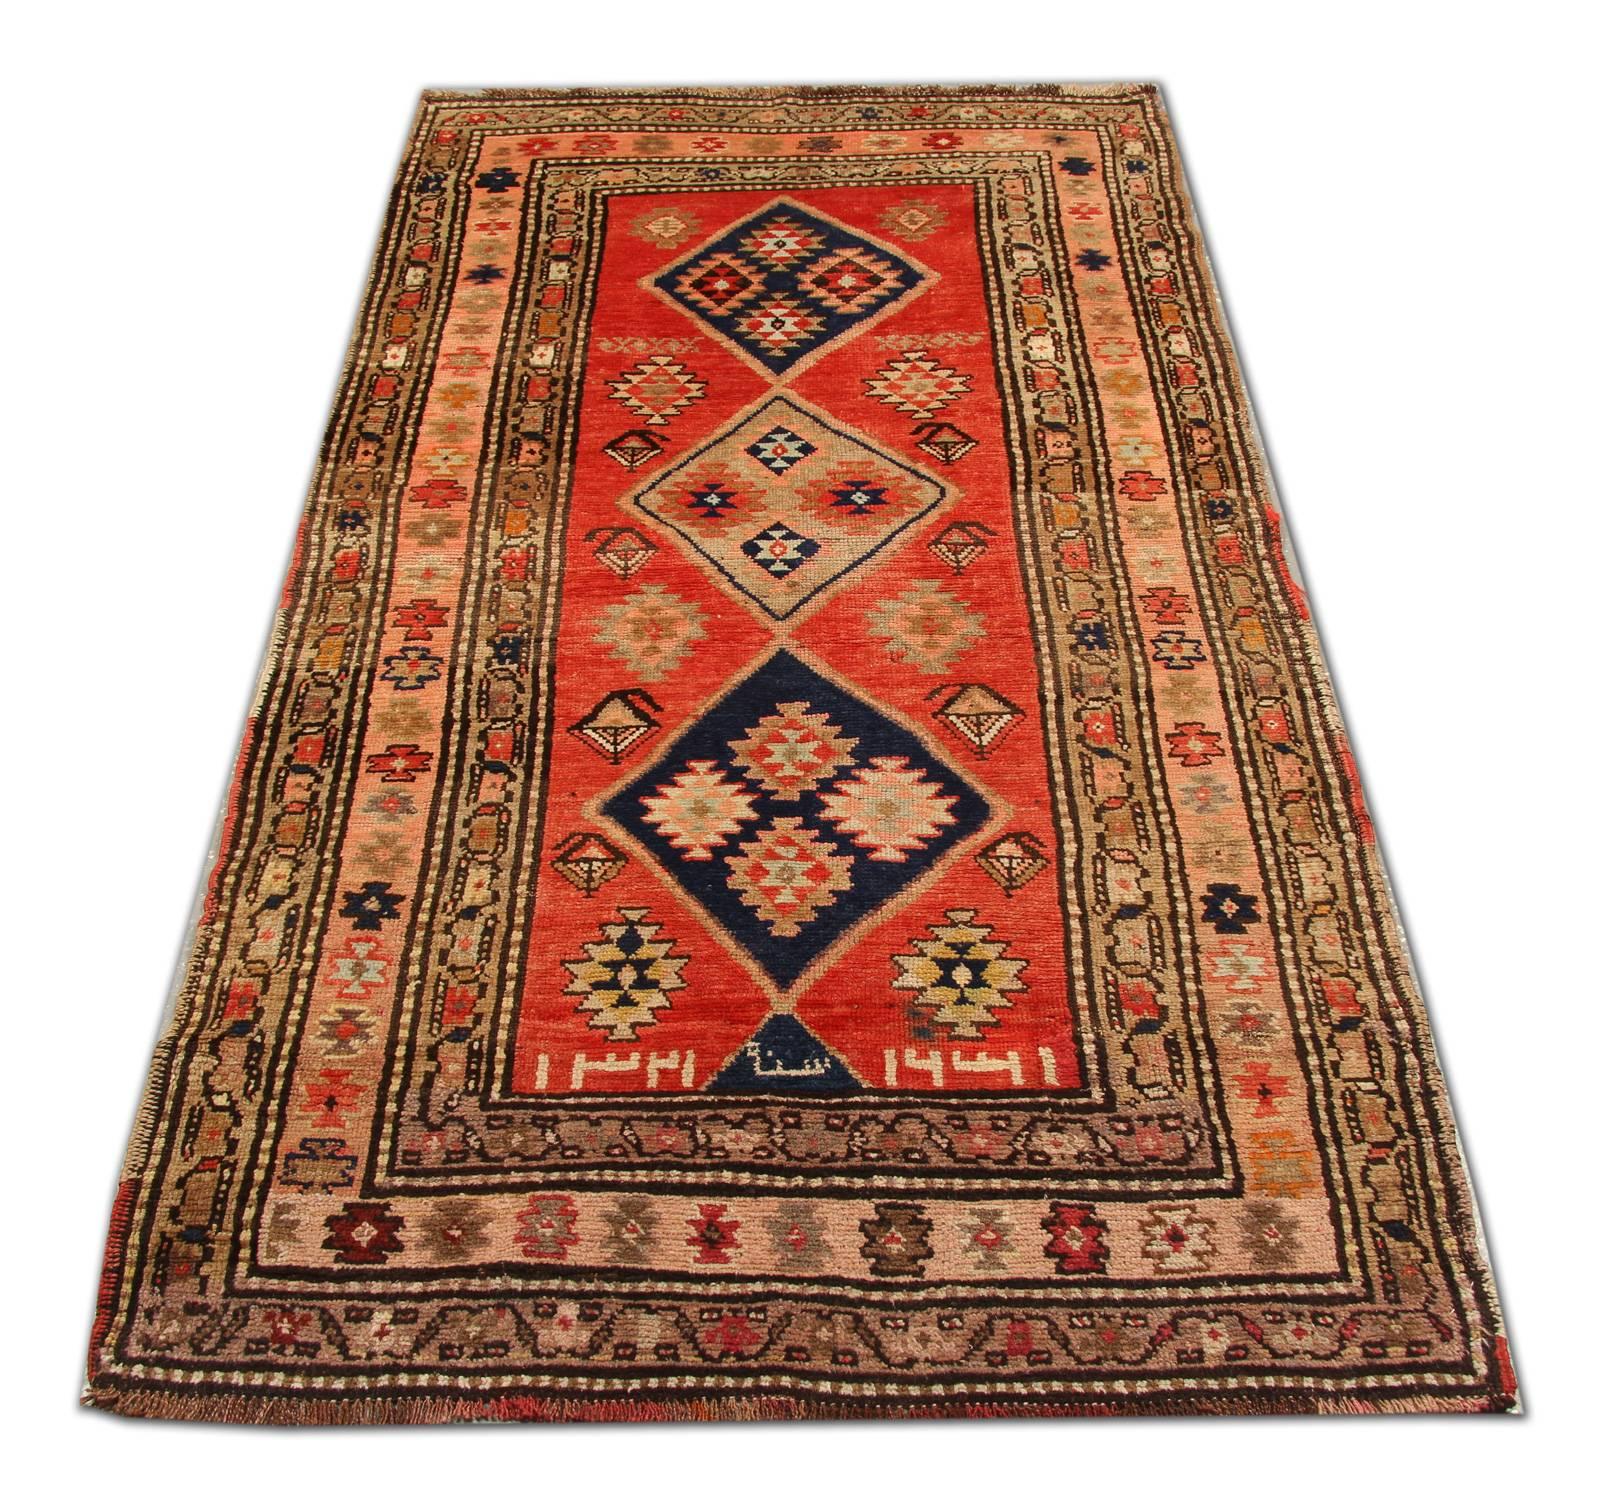 This rug is a vintage rug hand-knotted wide and long gallery runner from Caucasia. It has a geometric rug tribal design made with the wool pile and wool foundation. It can be a very good idea as a living room rug or dining room rug in home